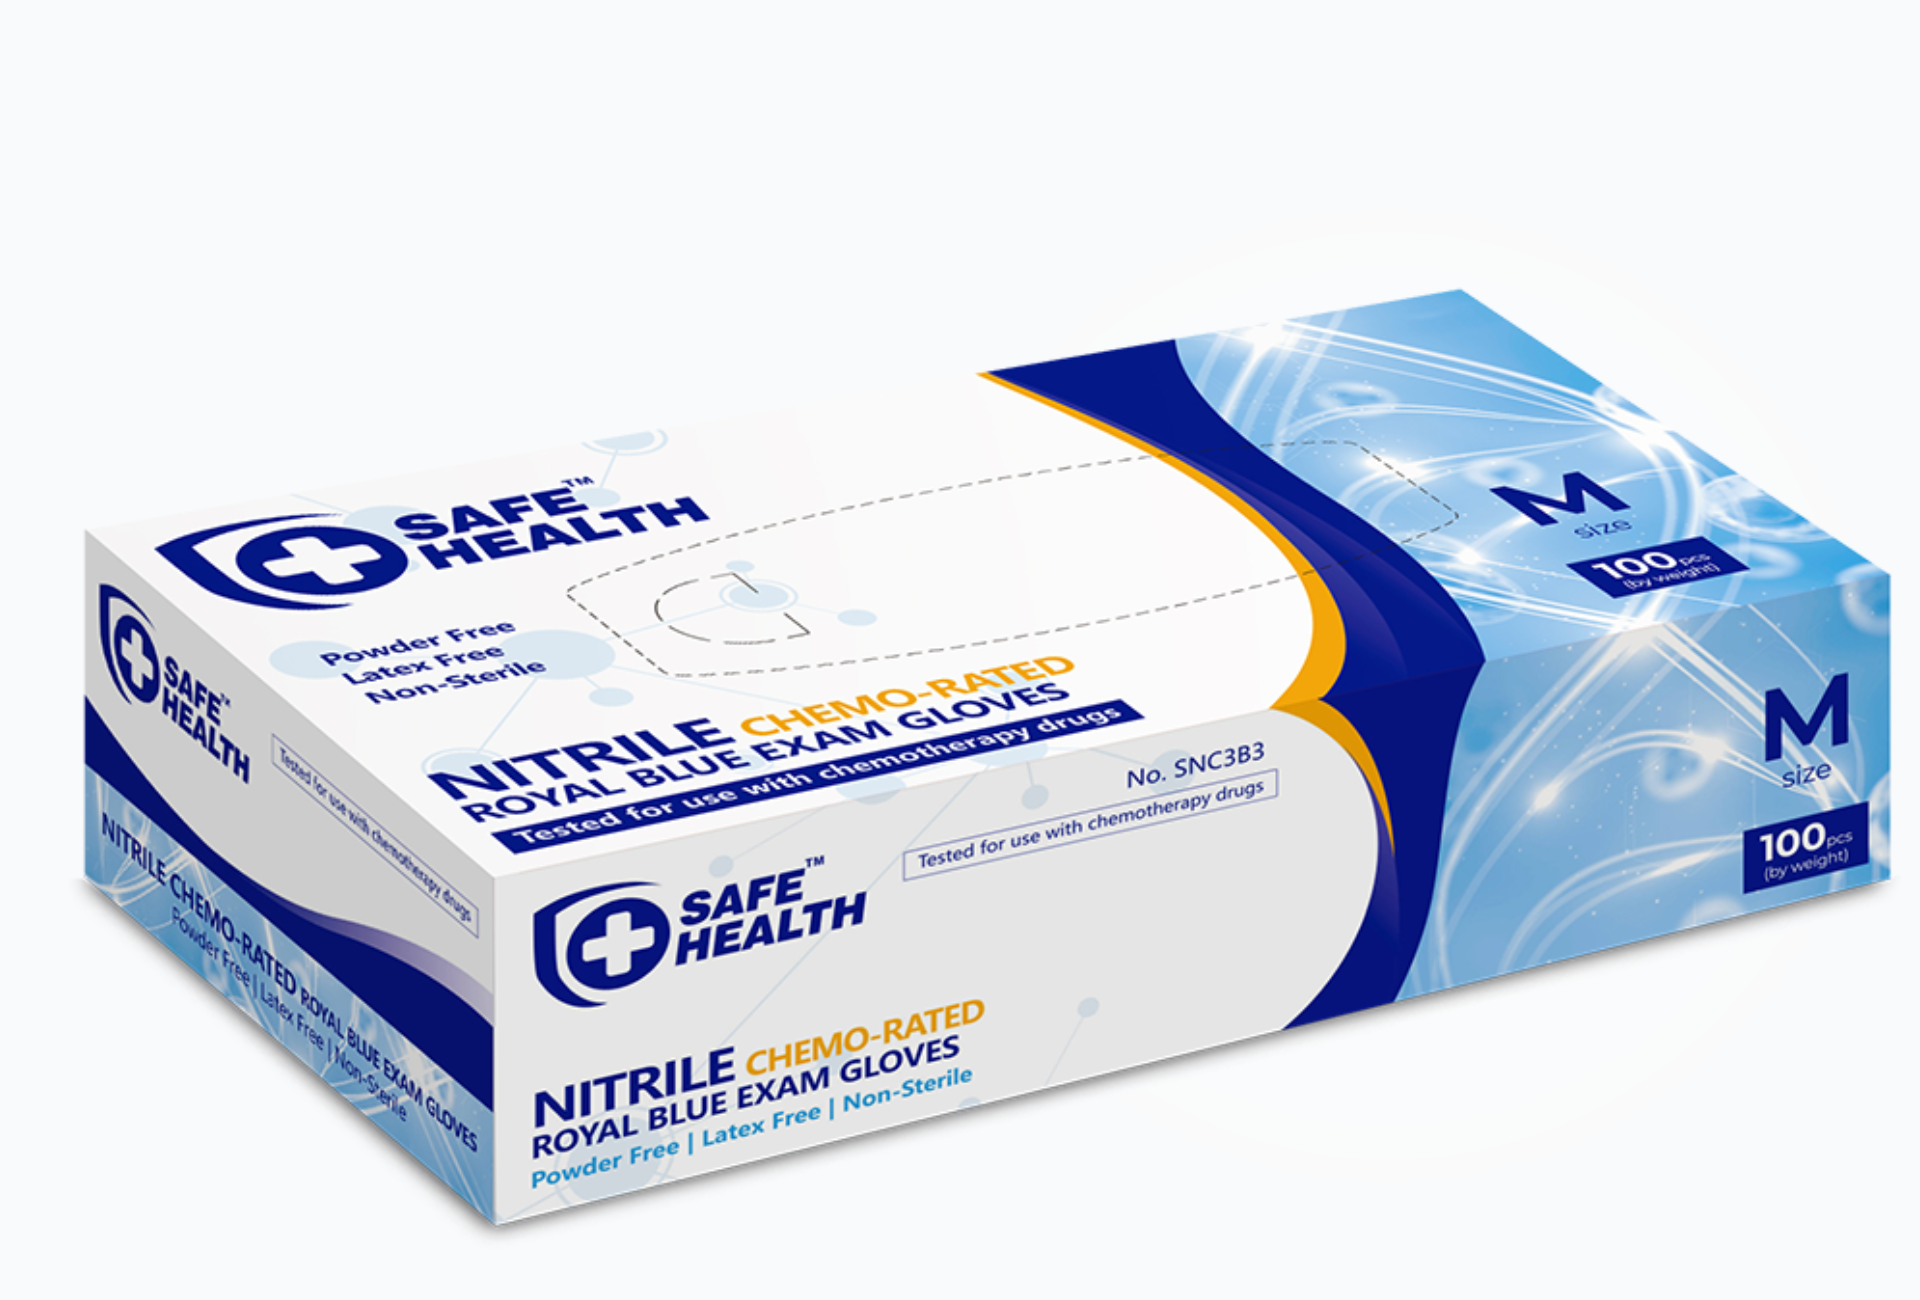 Chemo-Rated Classic Nitrile Examination Gloves